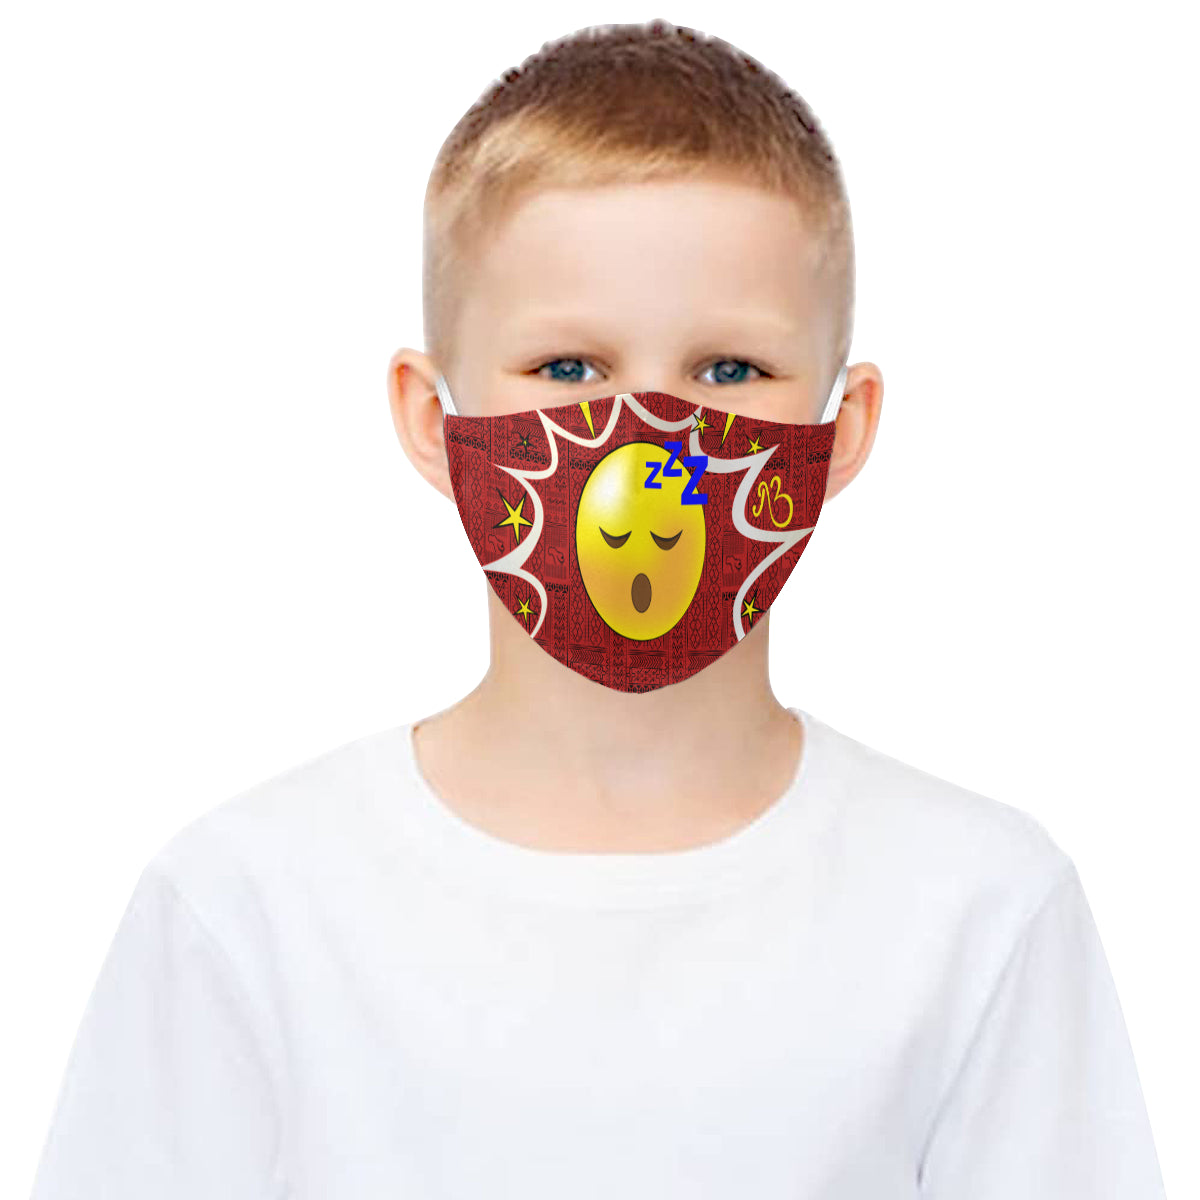 I'm Tired! Tribal Print Comic Emoji Cotton Fabric Face Mask with Filter Slot and Adjustable Strap - Non-medical use (2 Filters Included)